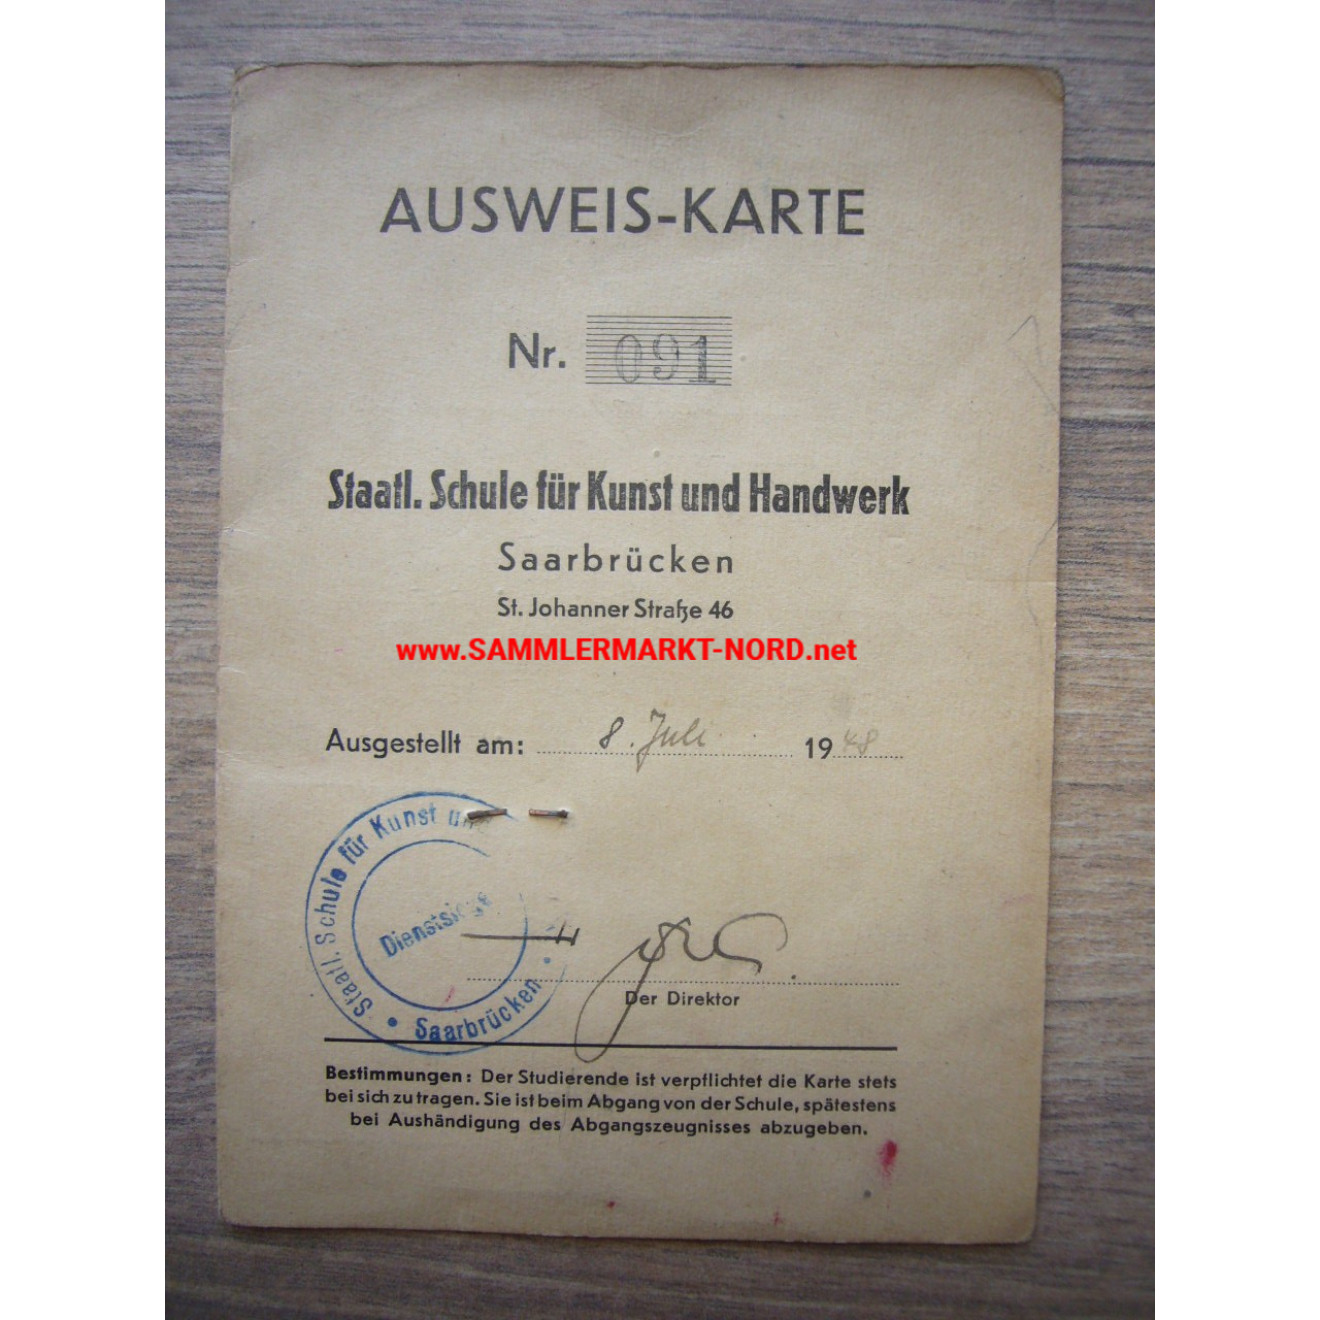 Saarbrücken - State School for Arts and Crafts - ID card